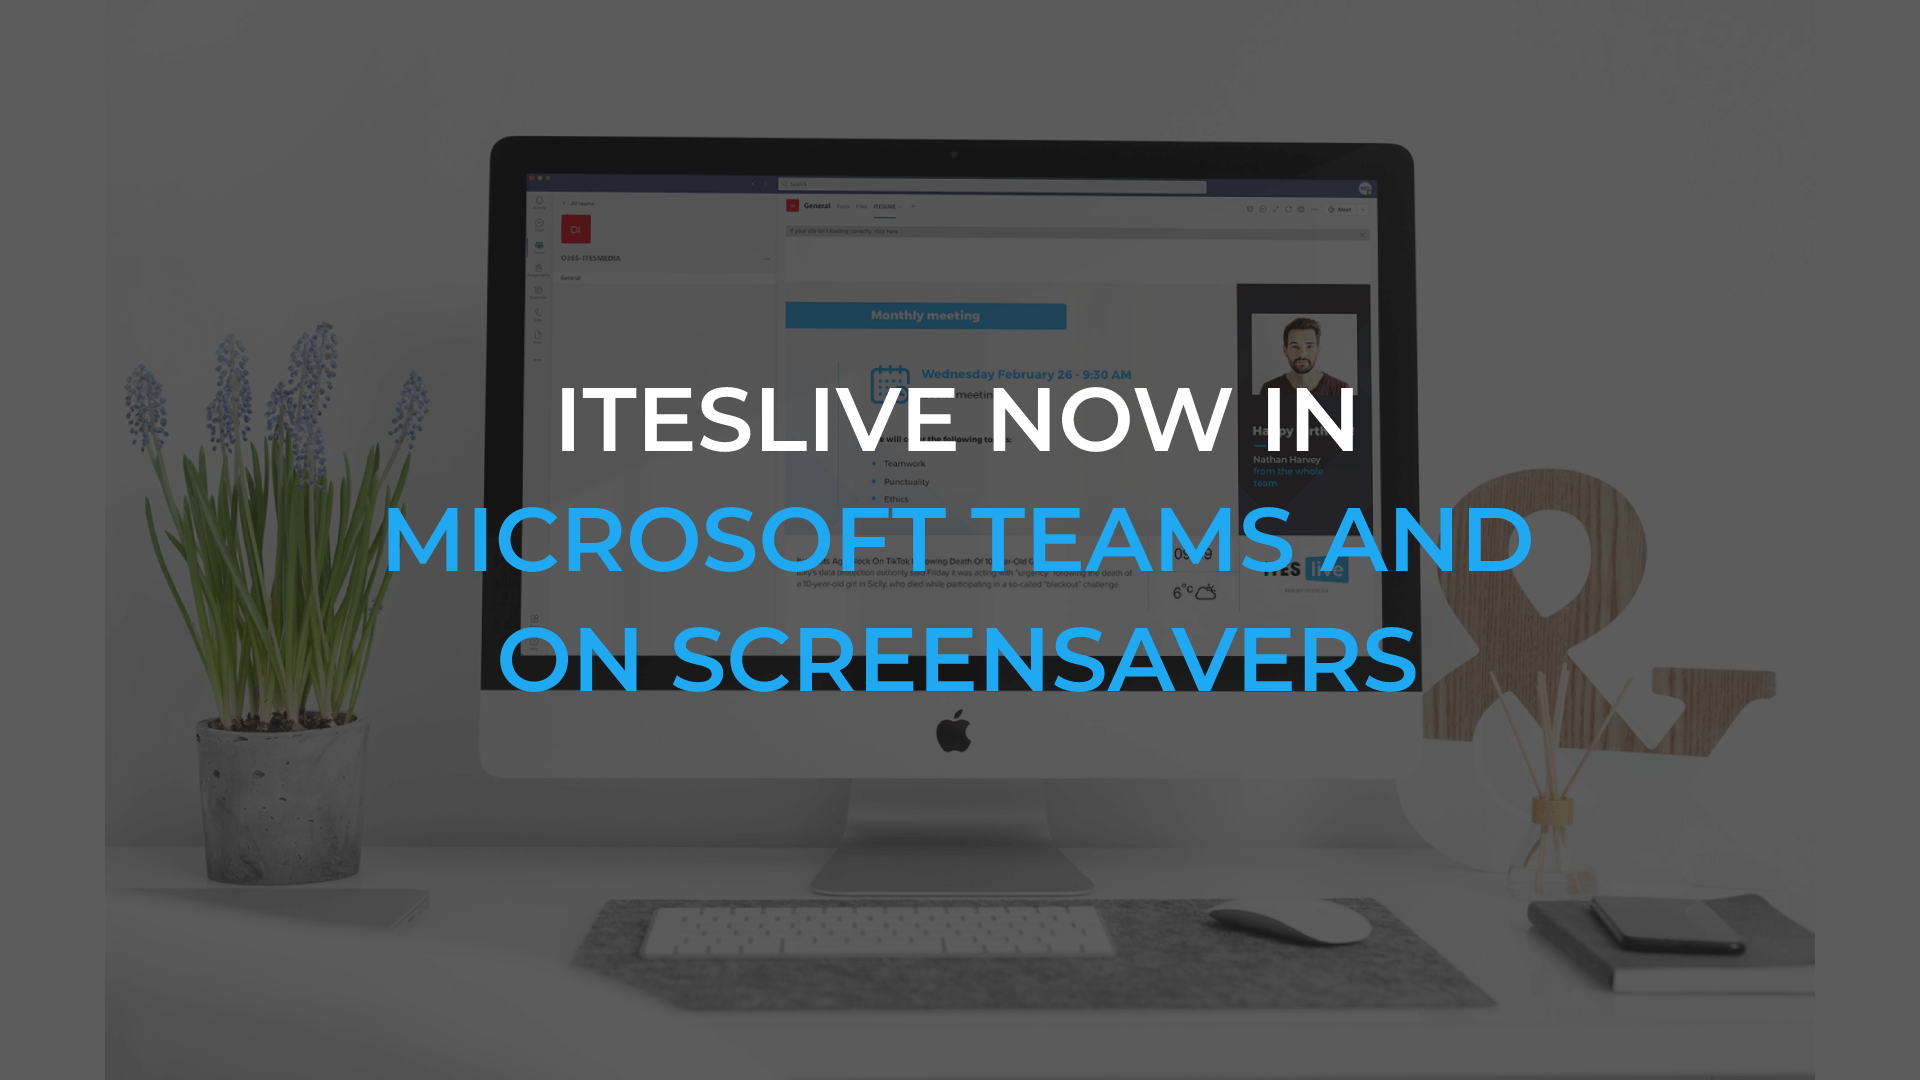 ITESLIVE now in Microsoft Teams and on screensavers